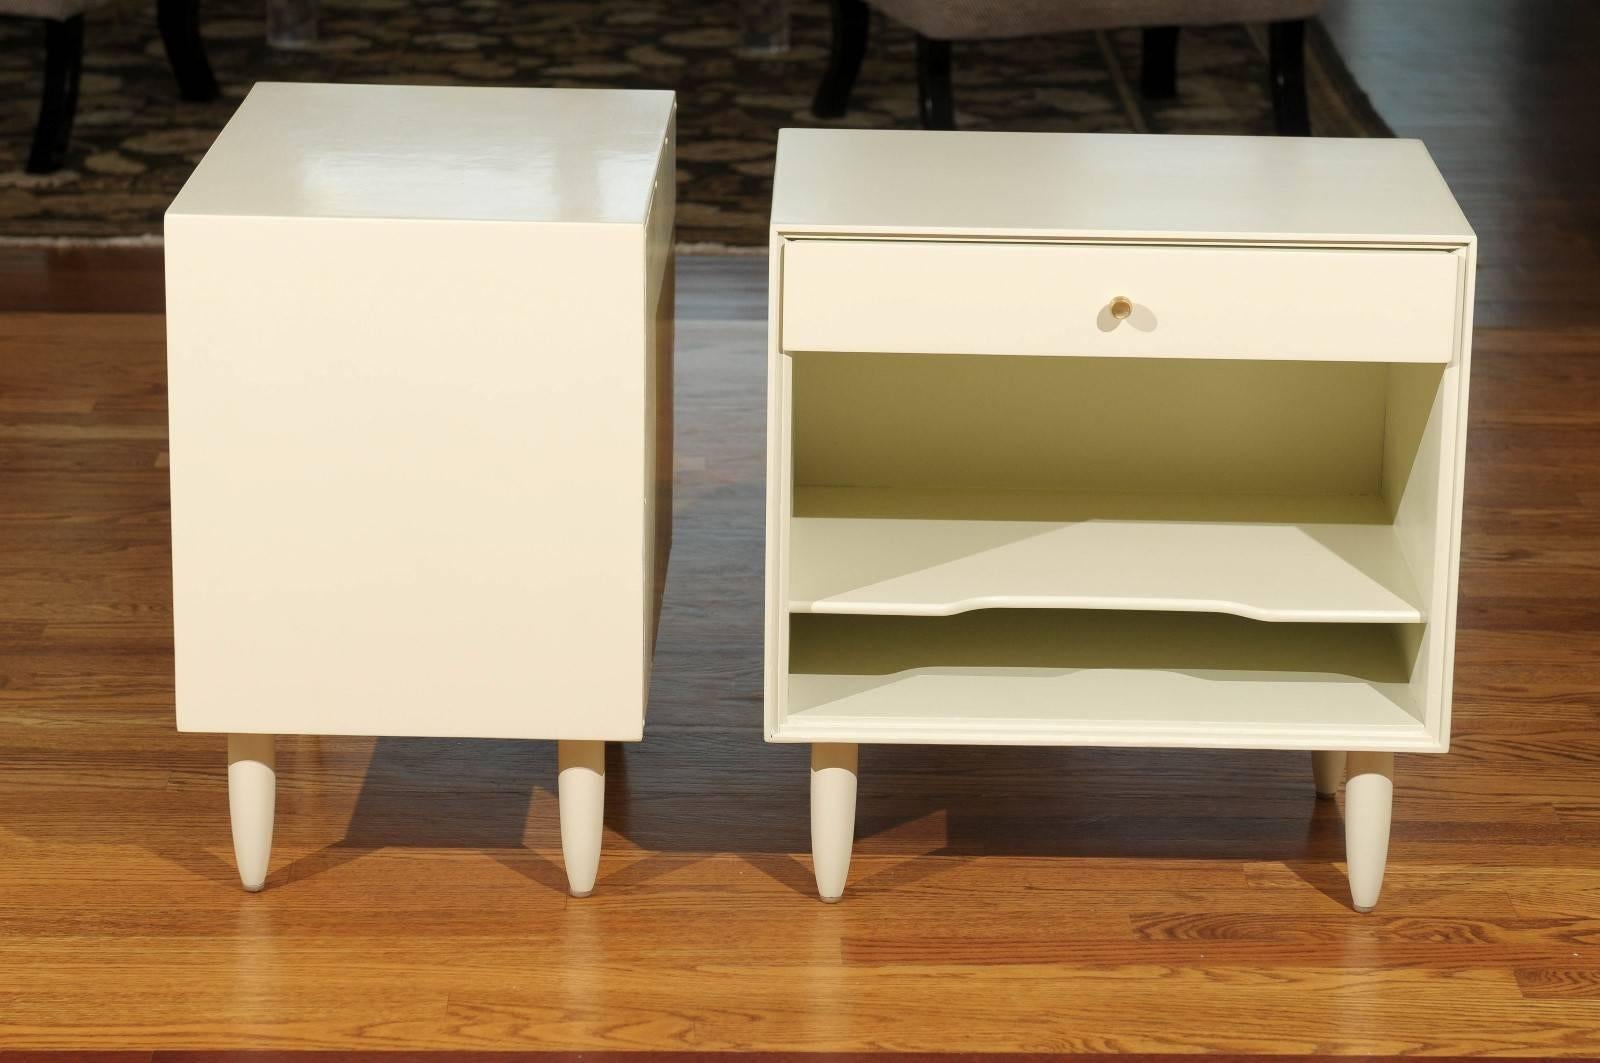 Mahogany Beautiful Restored Pair of Modern End Tables by John Stuart in Cream Lacquer For Sale